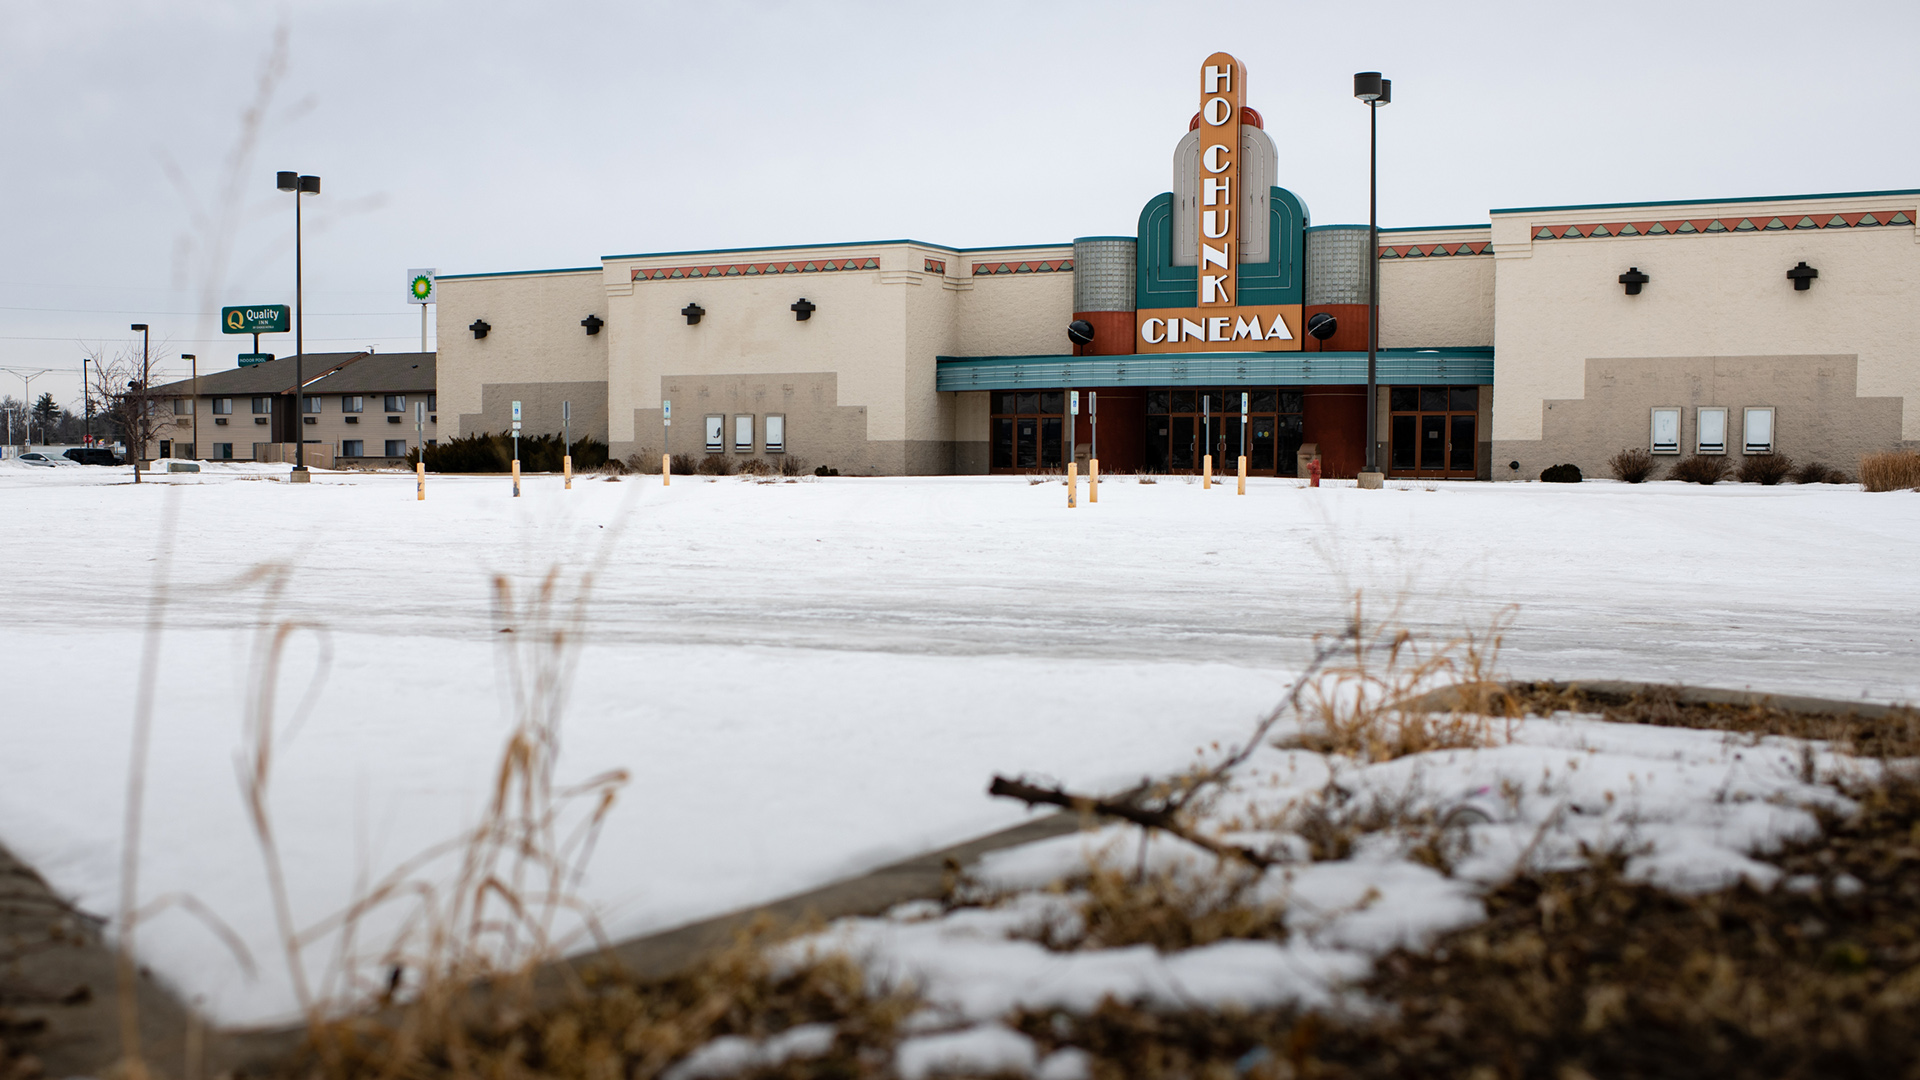 A movie theater with a marquee reading "Ho Chunk Cinema" faces a snow-covered empty parking lot.